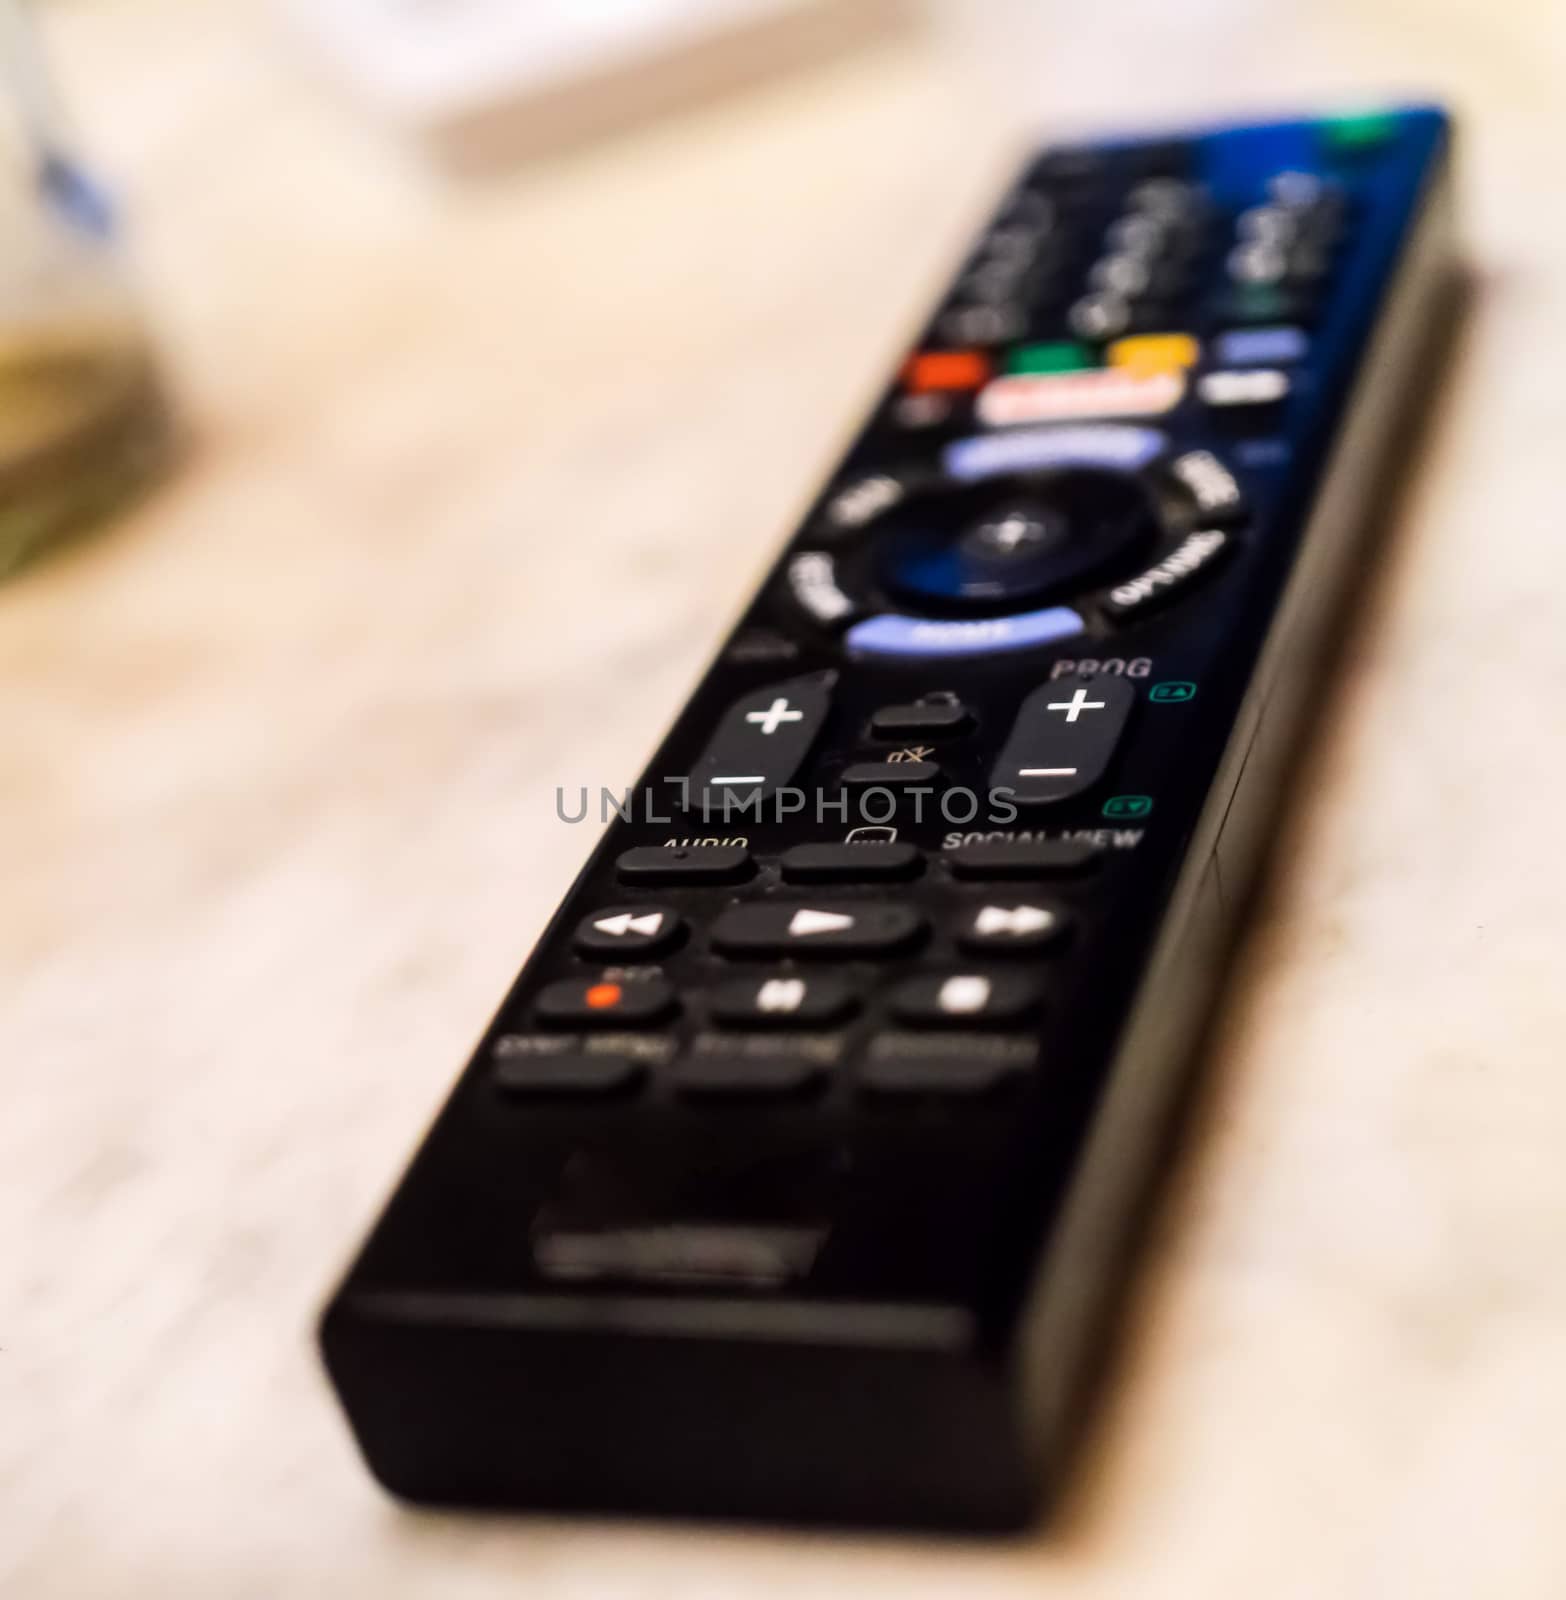 Intentionally blurred abstract photo of a remote control by geogif